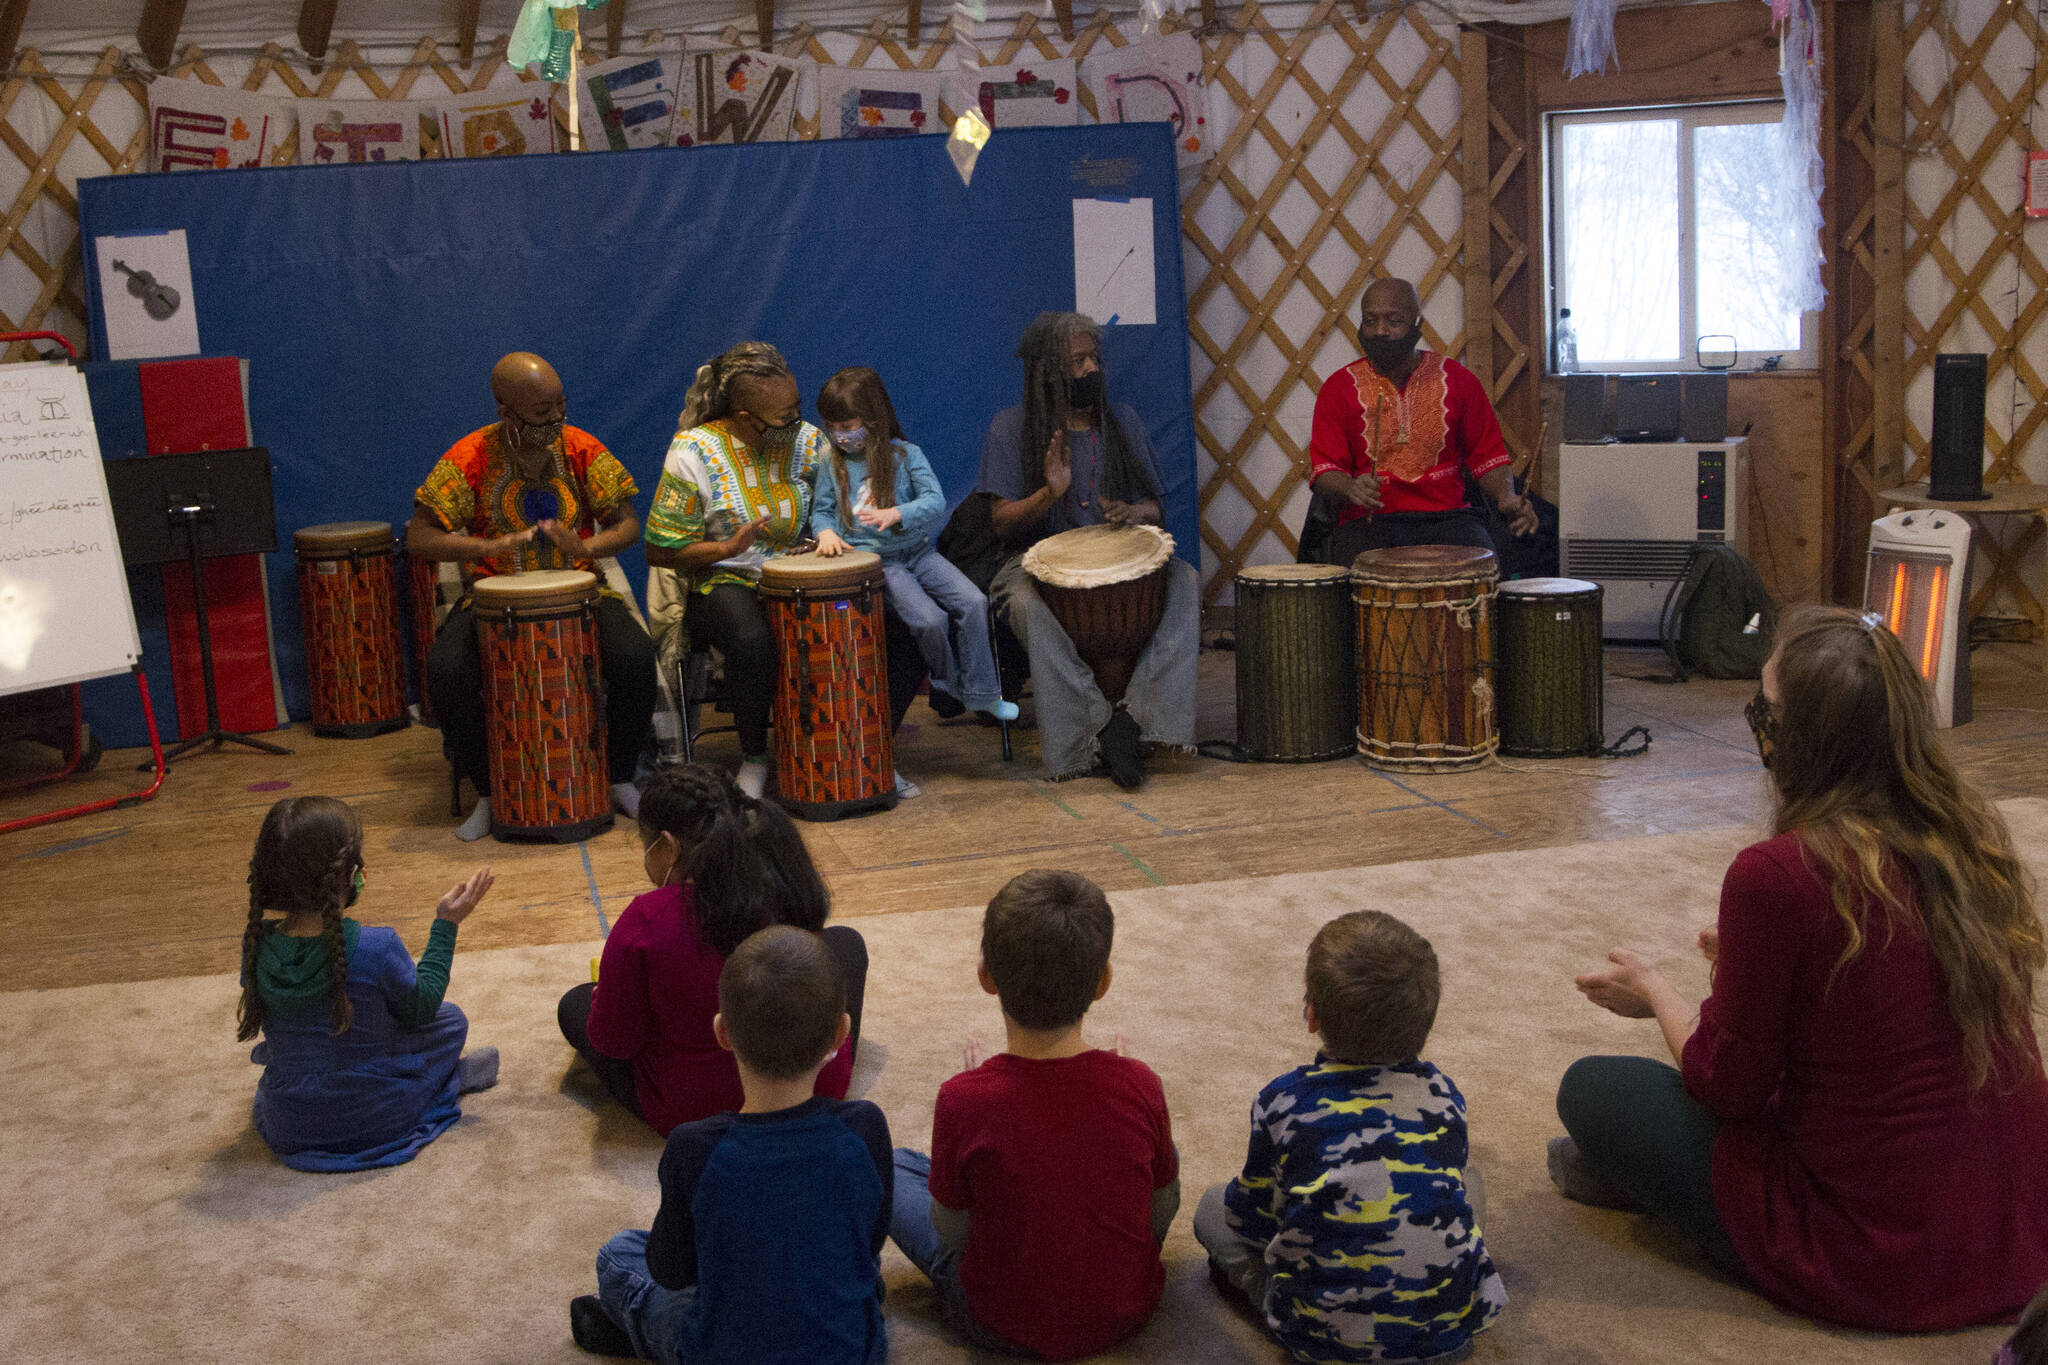 Sankofa Dance Theater Alaska teaches the Fireweed Academy Kindergarten class how to perform traditional African music during their residency on Dec. 9. (Photo by Sarah Knapp/Homer News)